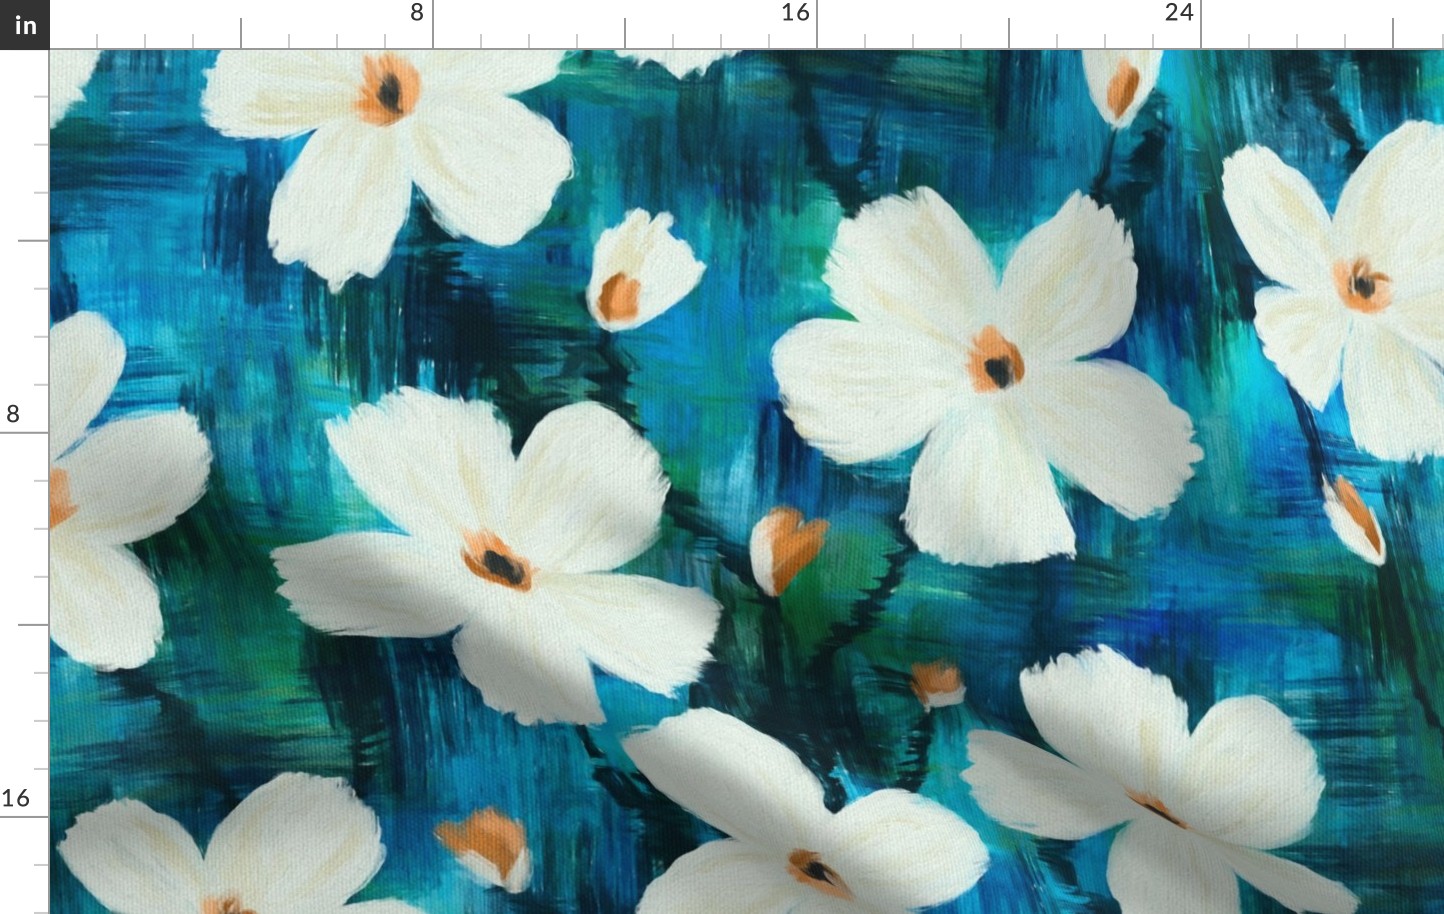 Messy Painted White Blooms on Dark Blue and Green - large scale